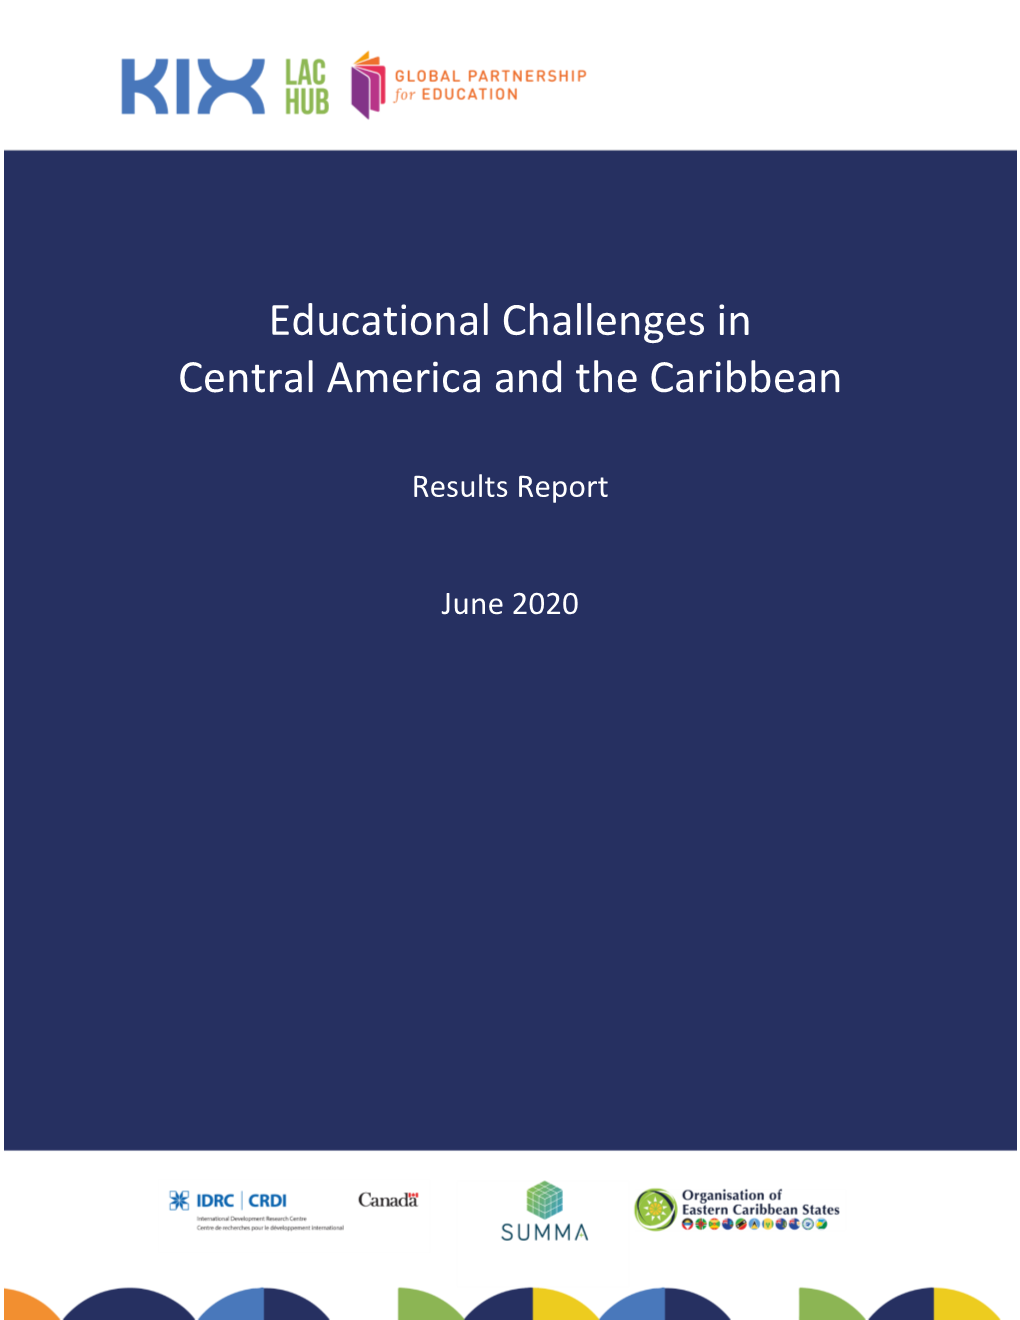 Educational Challenges in Central America and the Caribbean